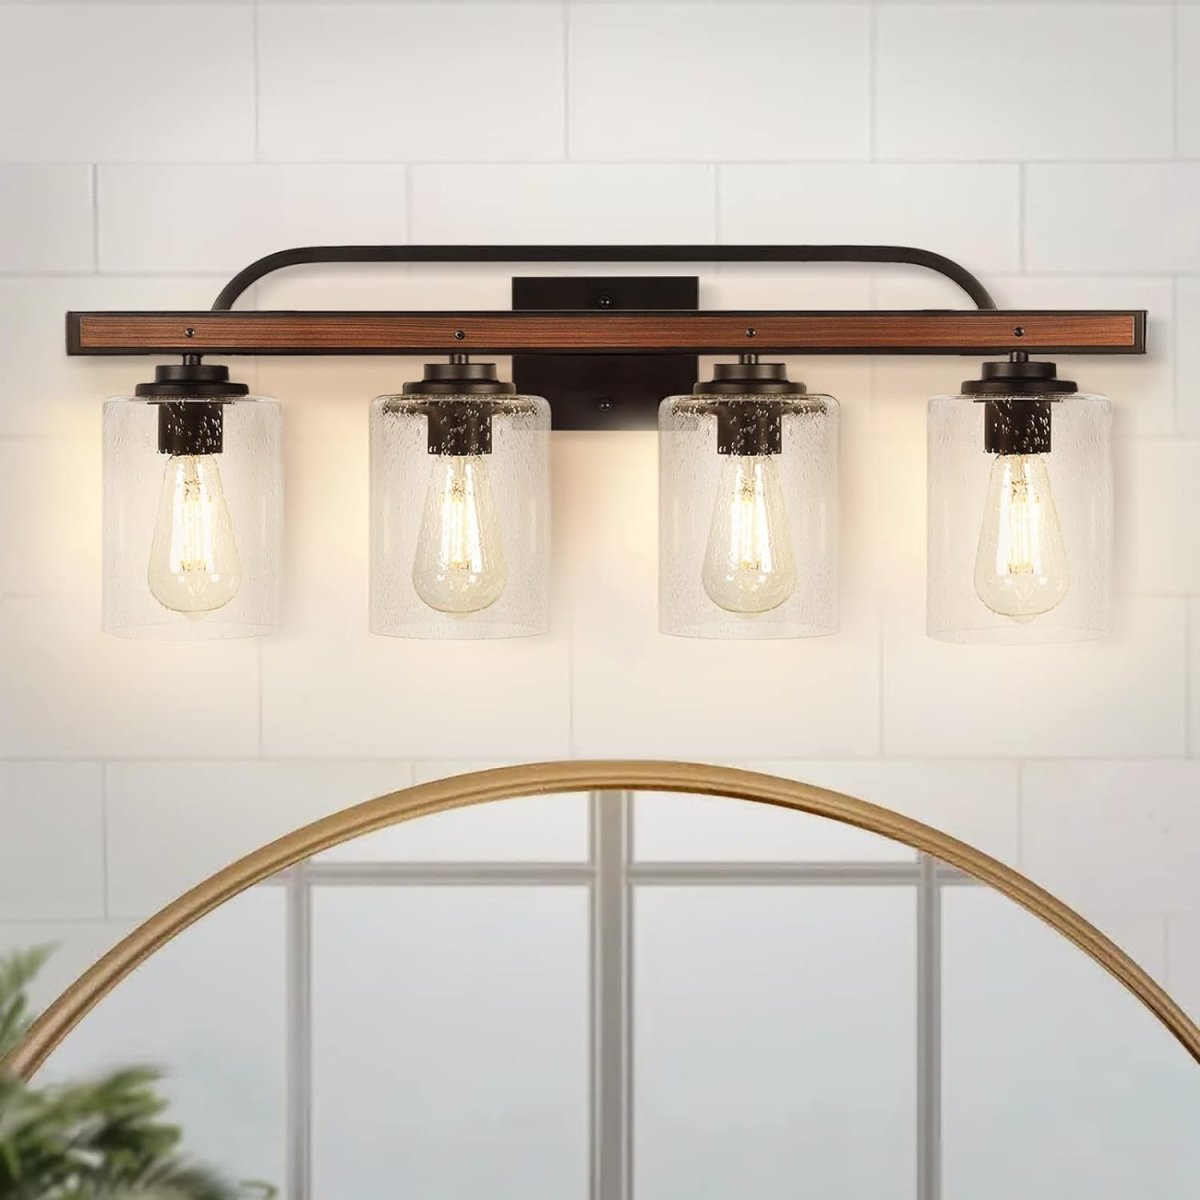 Depuley 4-Light Wall Sconces, Vintage Black Bathroom Vanity Light with 4 Clear Glass Shade, Modern LED Wall Mounted Lamp, Farmhouse Wall Light Fixture for Bedroom,Living Room,Porch, E26 Base - WS-FNW25-60B 1 | DEPULEY